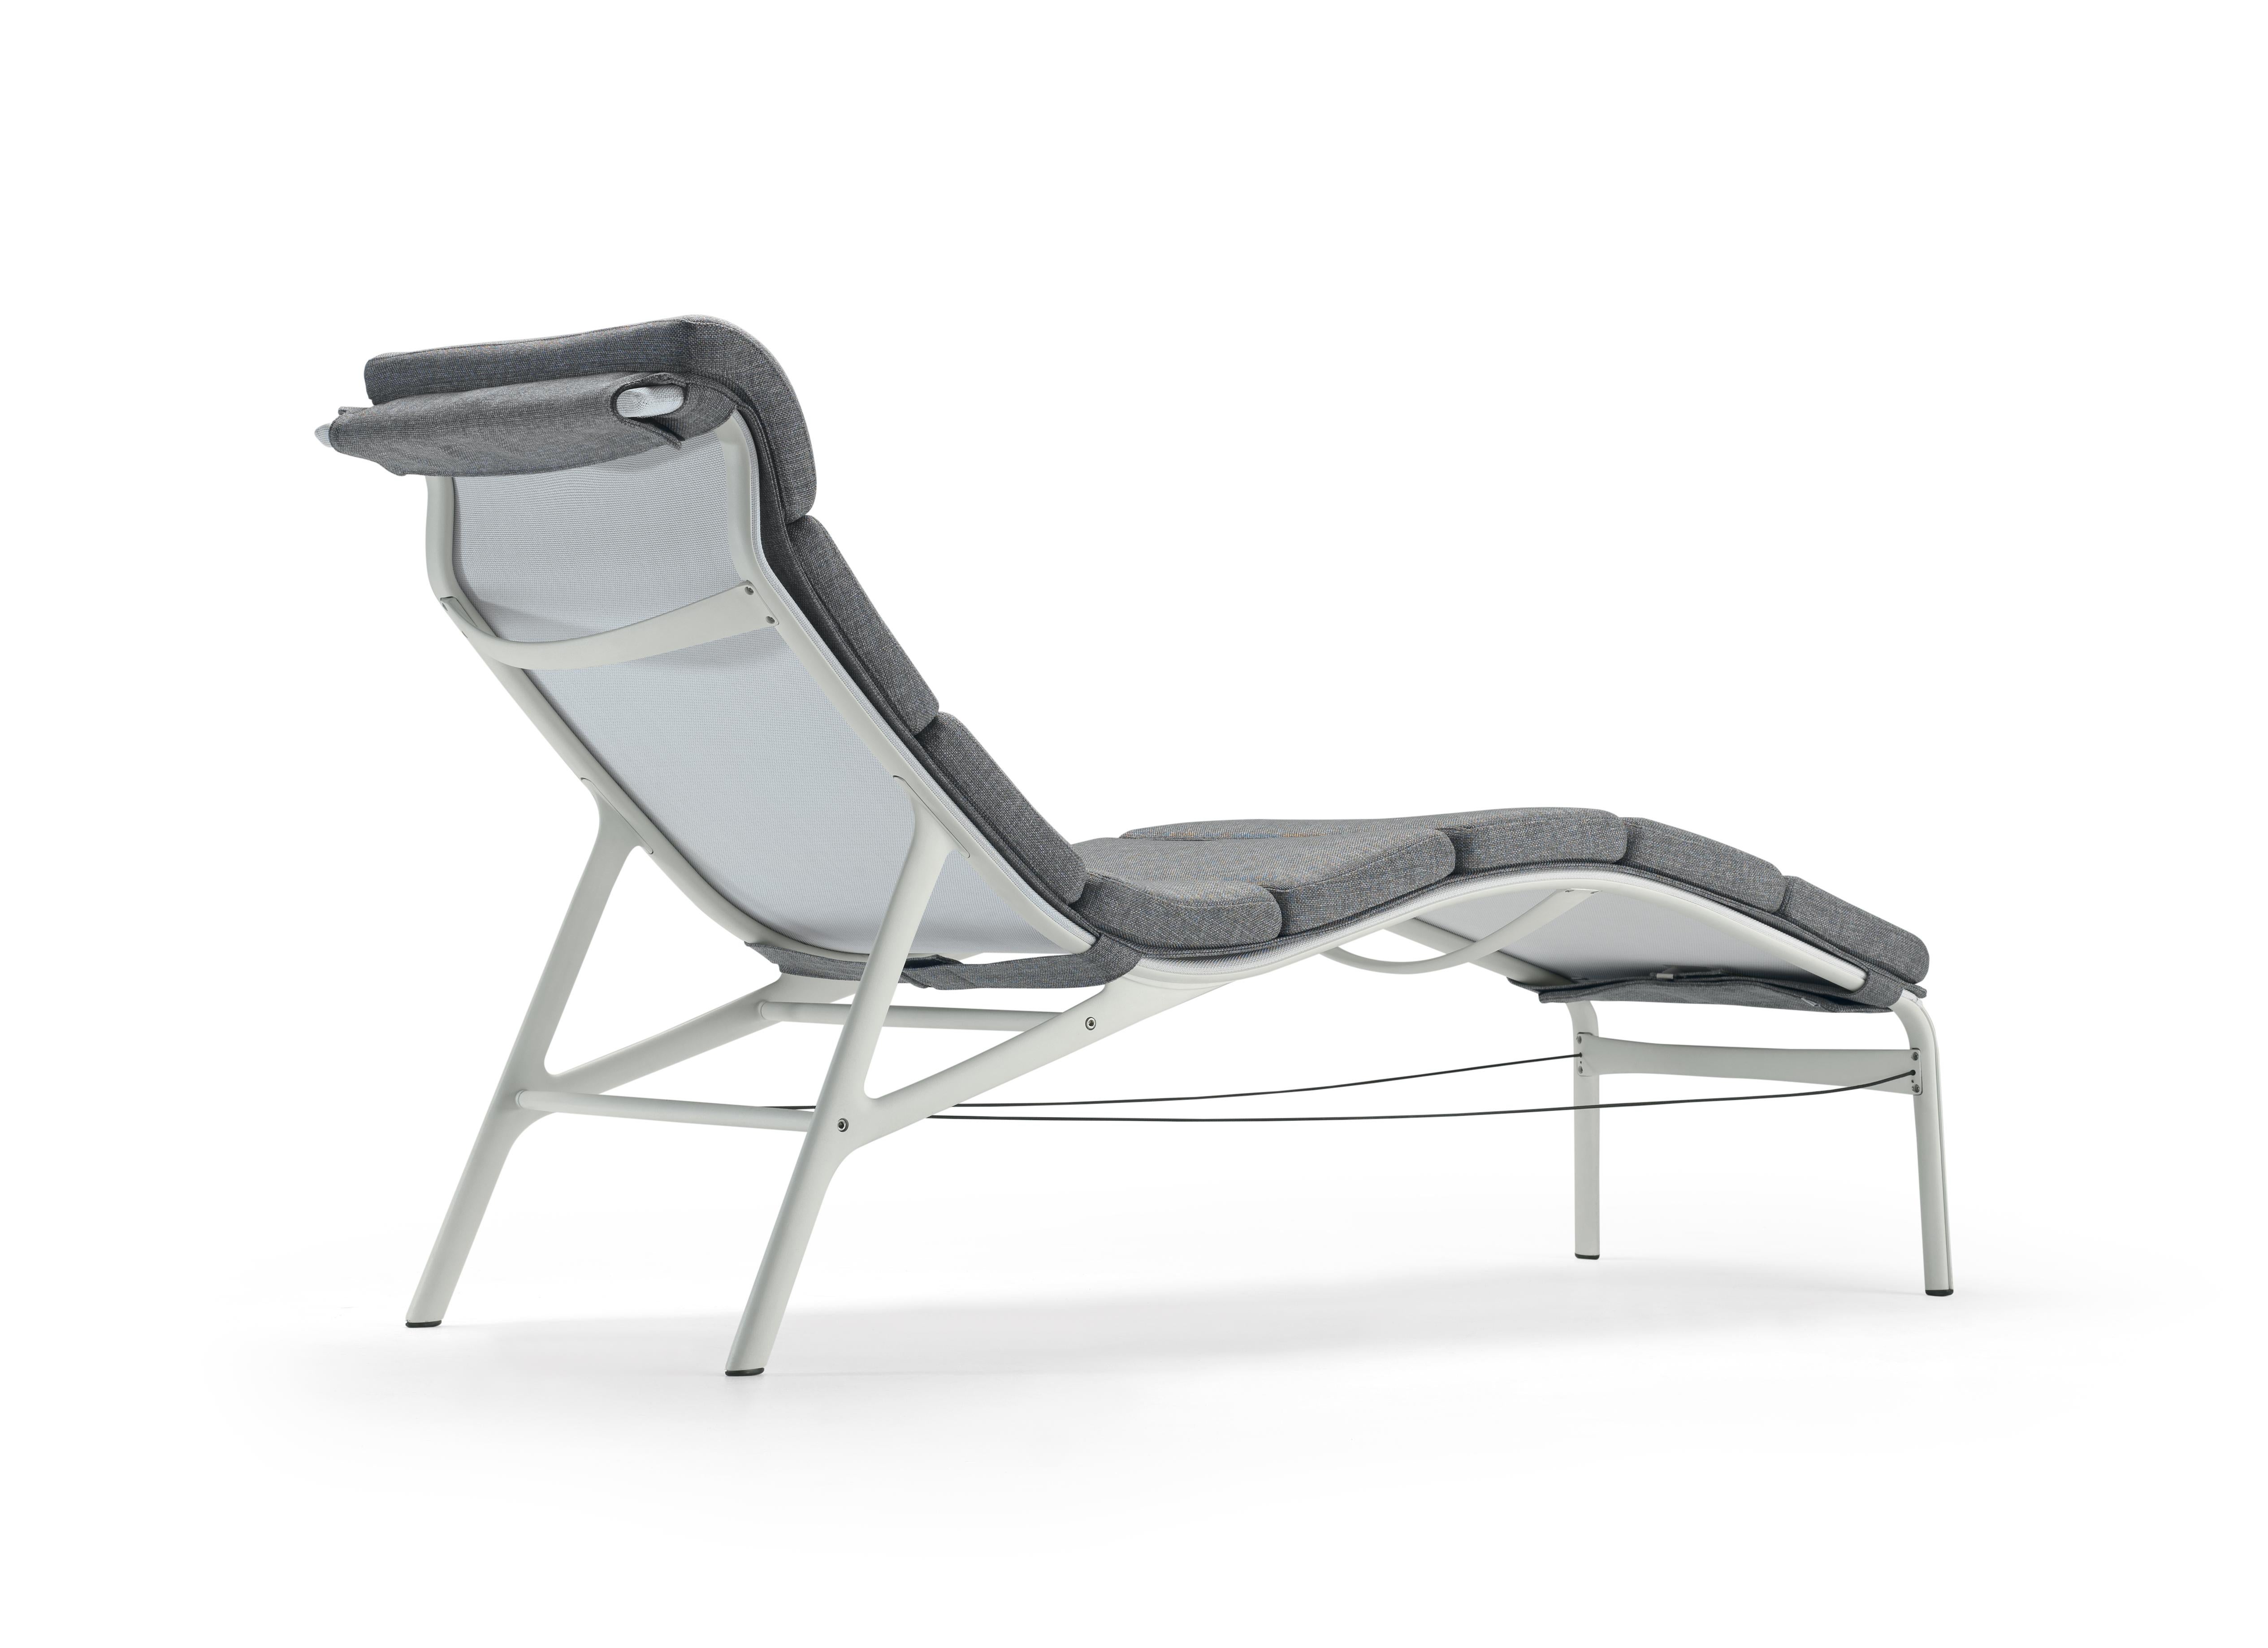 Alias 414 Longframe Soft Chair in Grey Seat and White Lacquered Aluminum Frame by Alberto Meda

Chaise longue with structure composed of extruded aluminium profile and die-cast aluminium elements. Seat and back upholstered with cover in